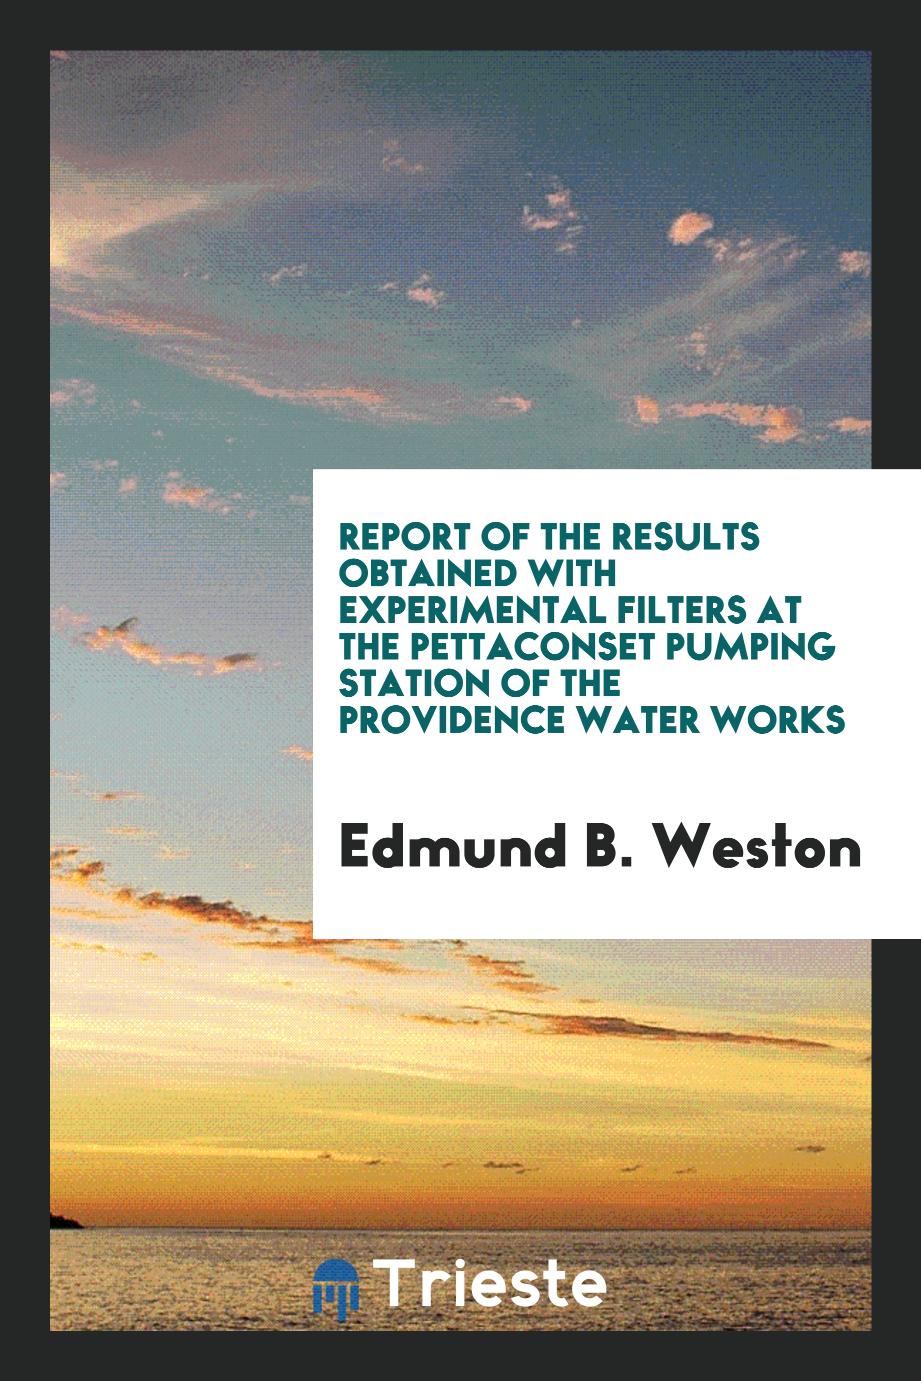 Report of the results obtained with experimental filters at the Pettaconset pumping station of the Providence water works